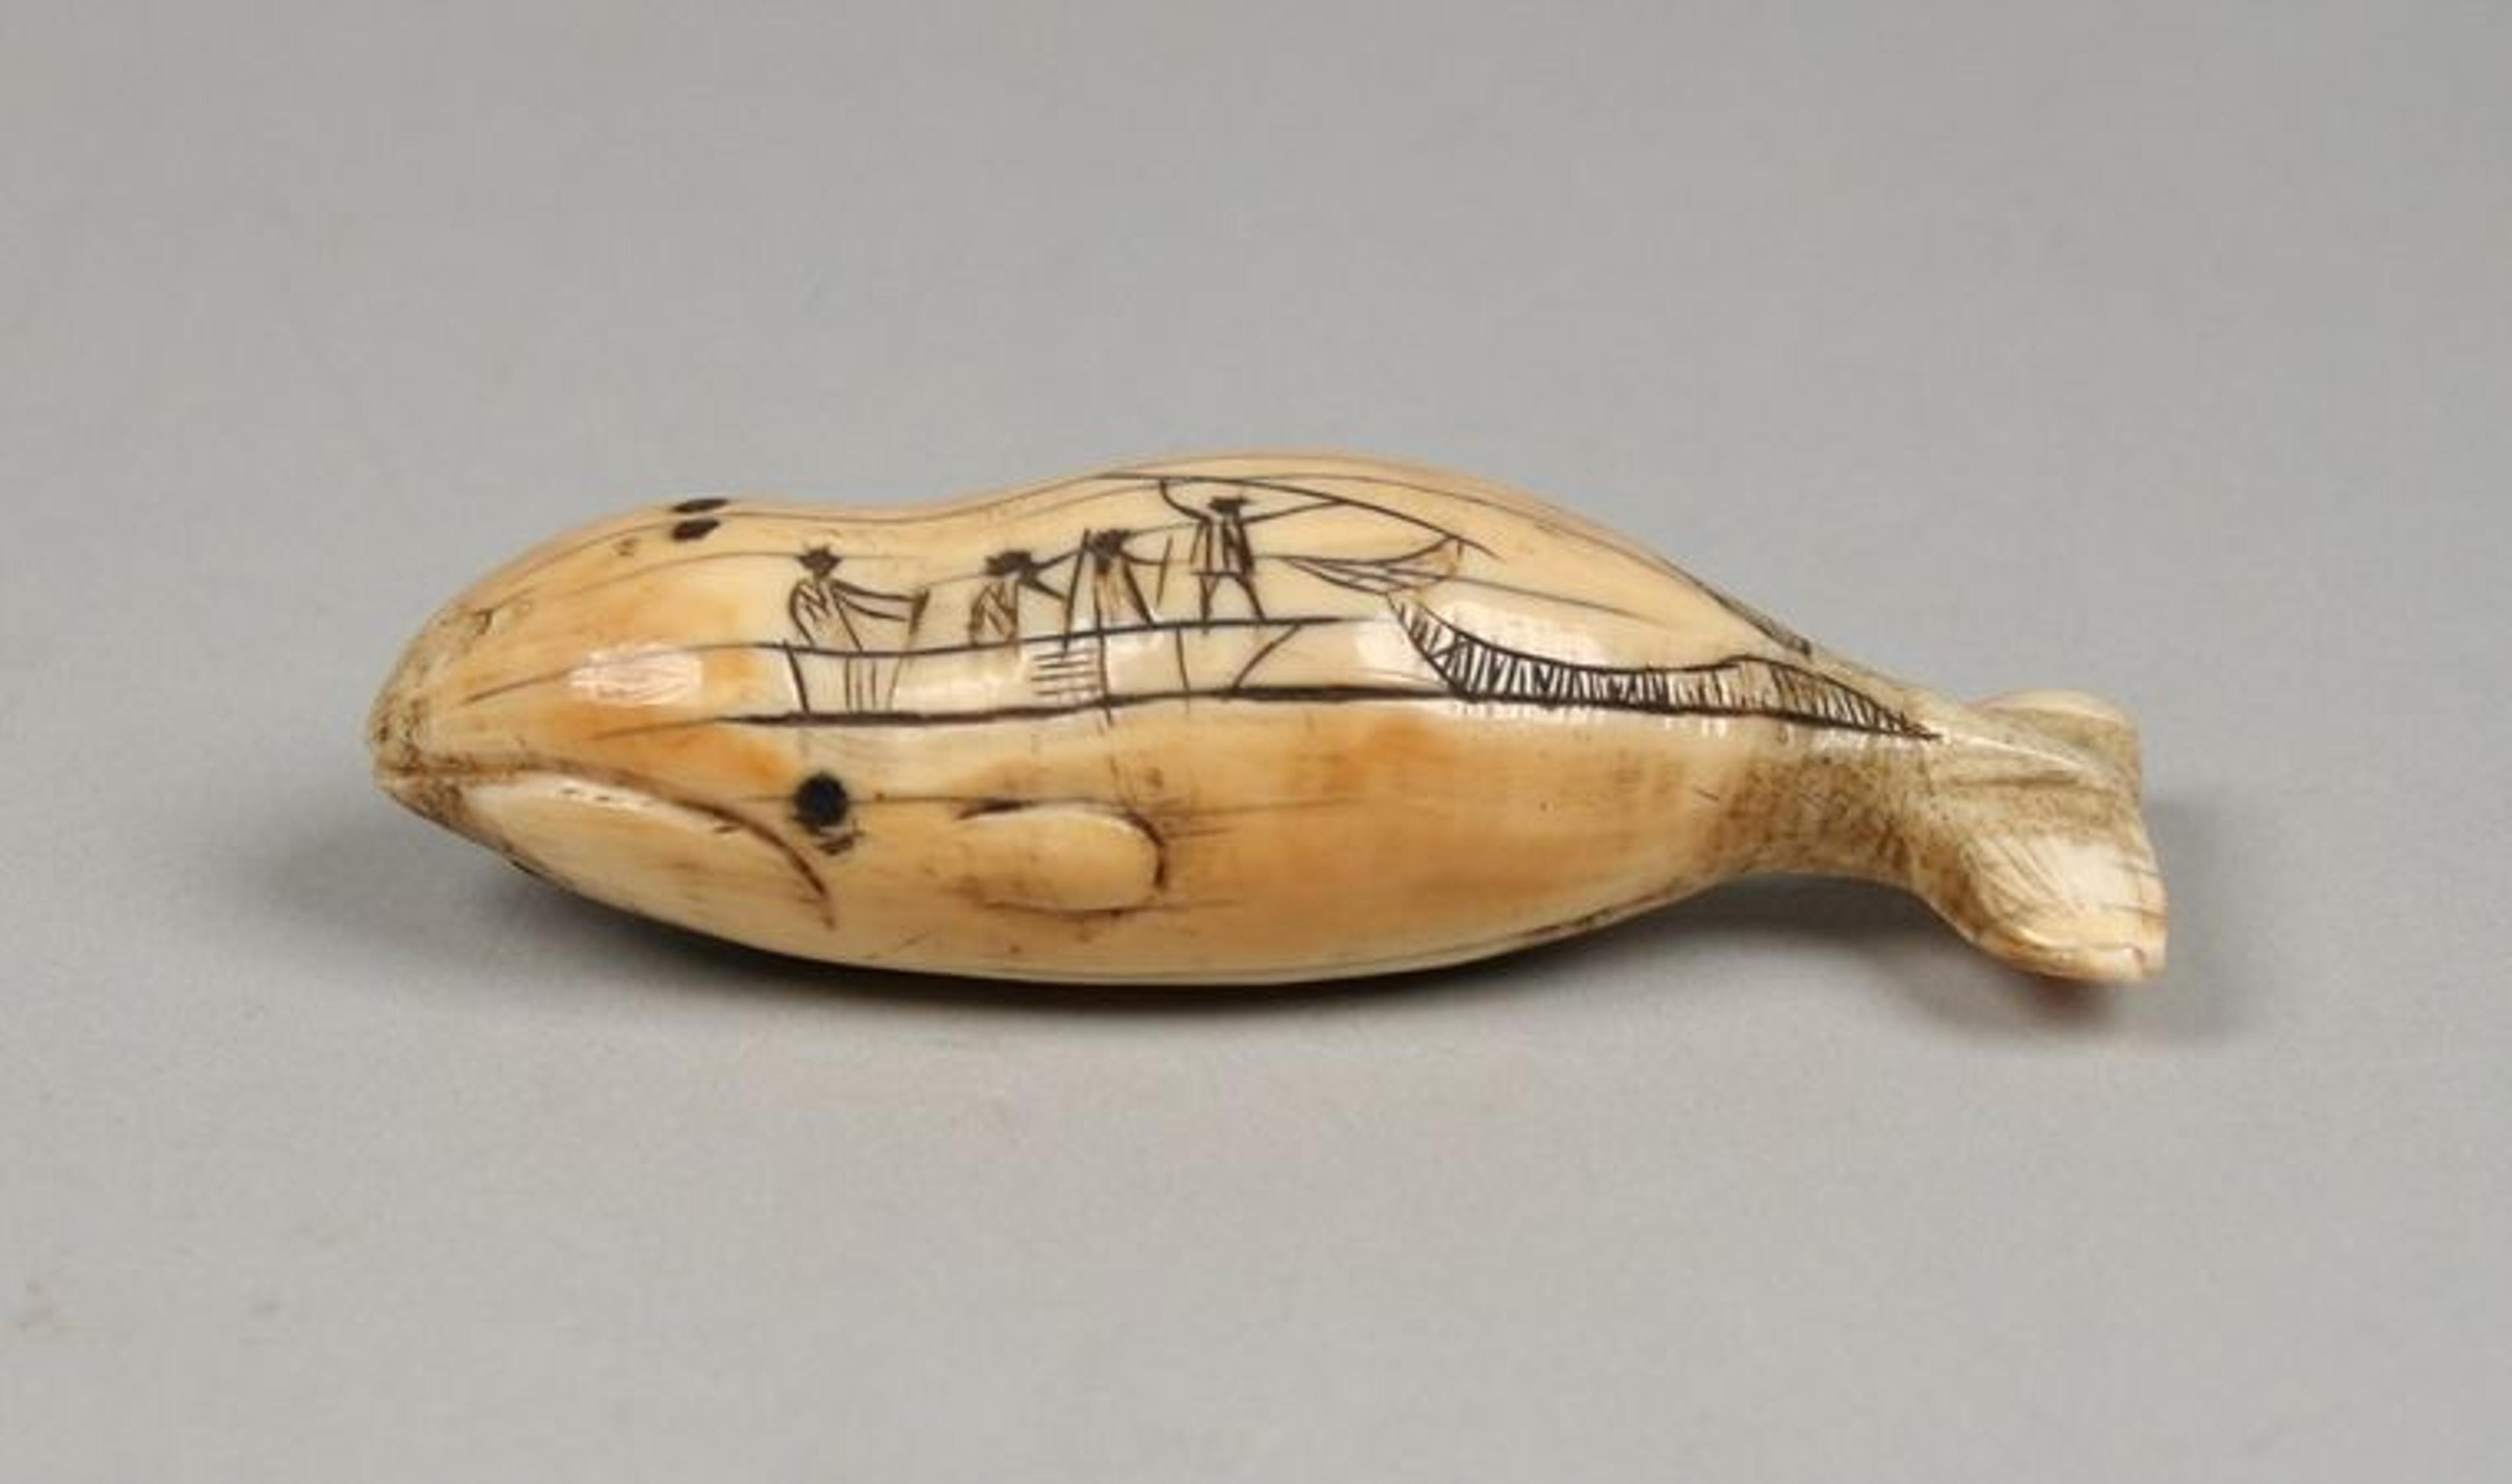 A simple scene of hunters on a boat with the leftmost hunter holding a spear over a whale is etched into a  small piece of ivory that has been carved into the shape of a whale.